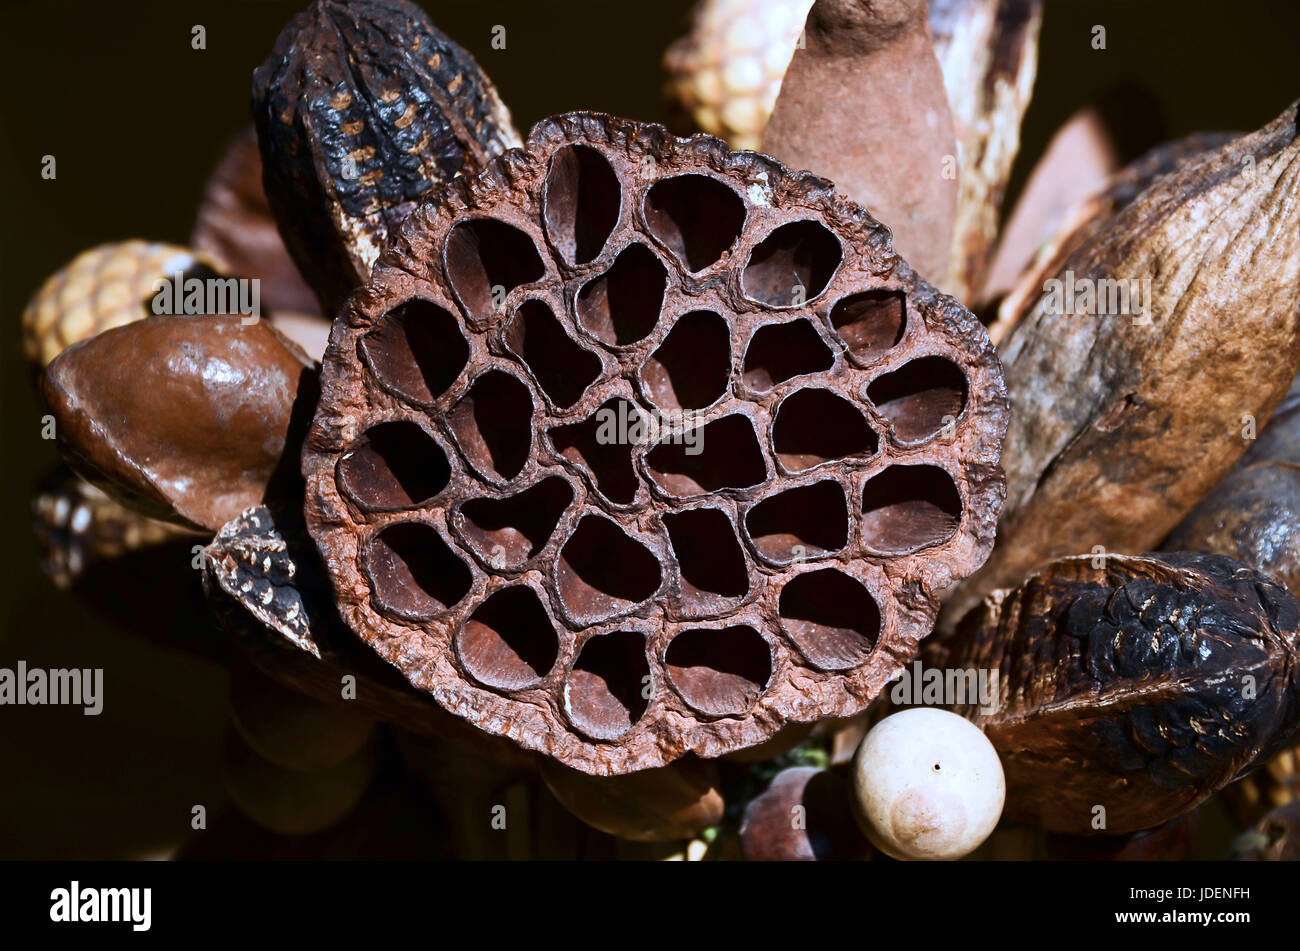 Lotus flower seed pod, dry out, in sun light Stock Photo